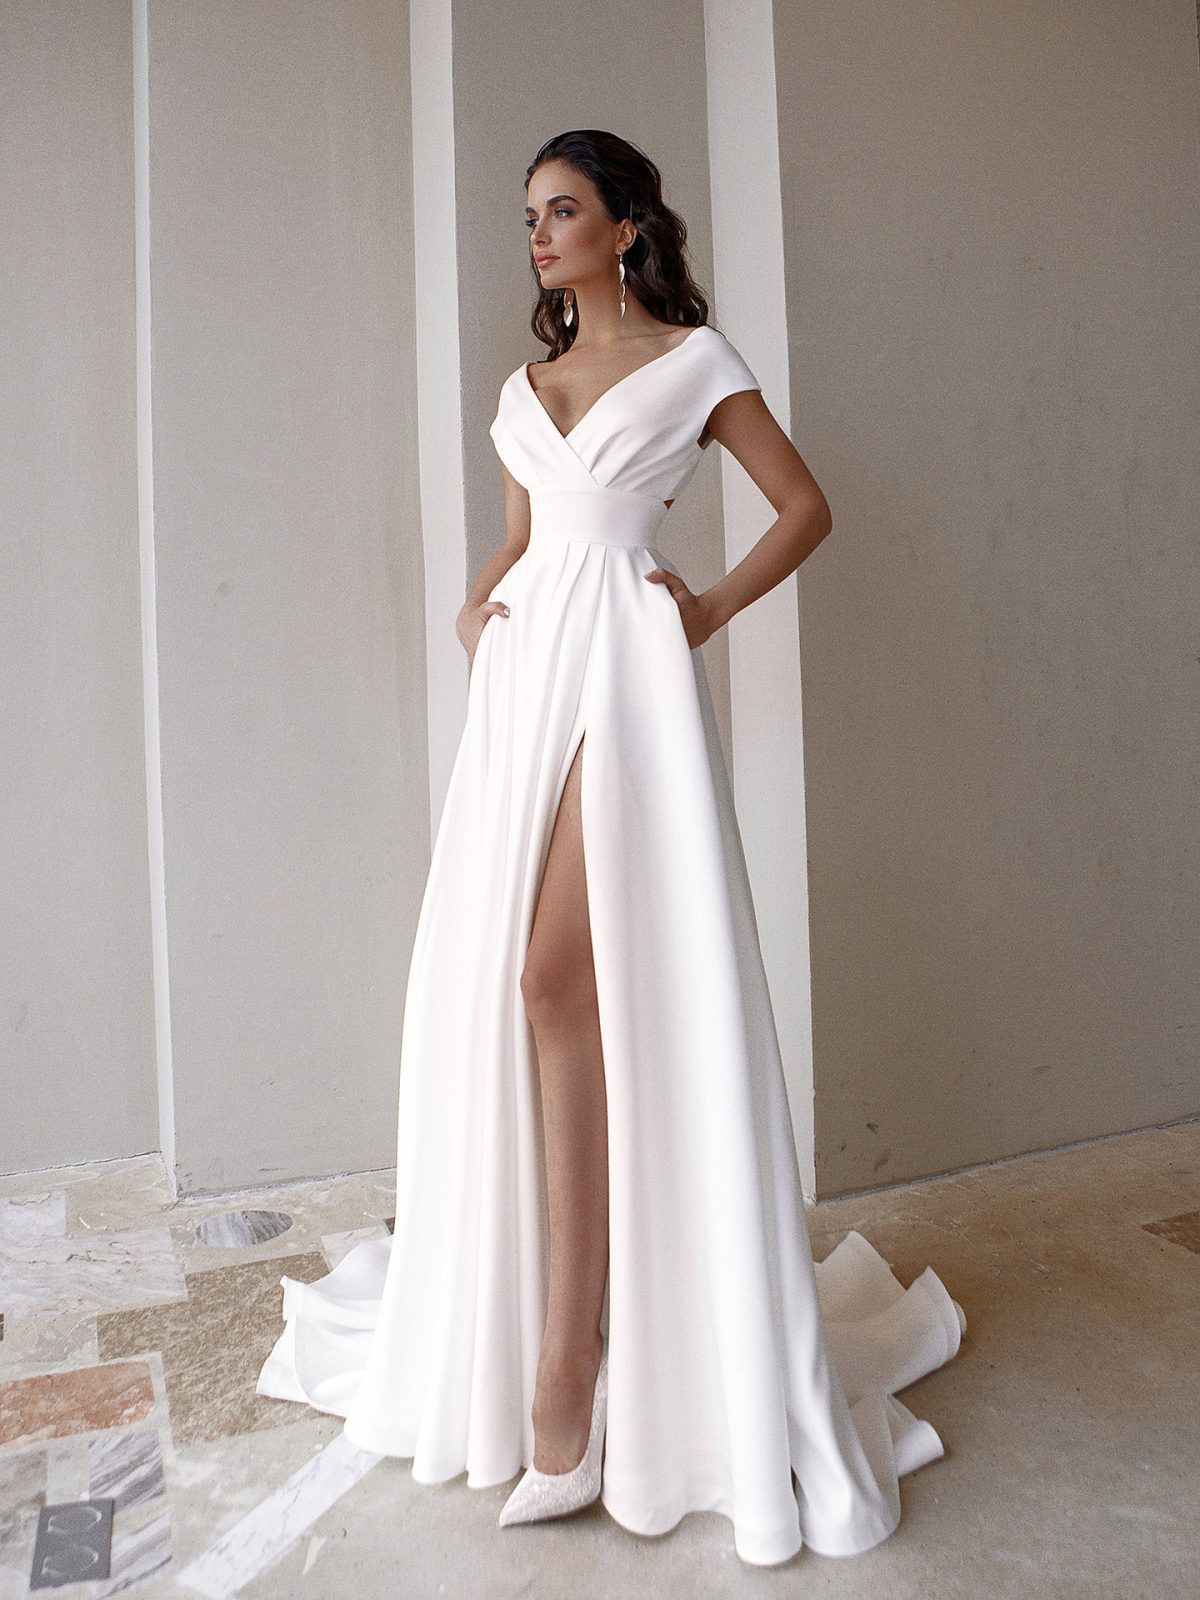 Picture Chest Wrapped Ruffled White Medium Waist Solid Color Office Maxi Dress - Dresses - Uniqistic.com